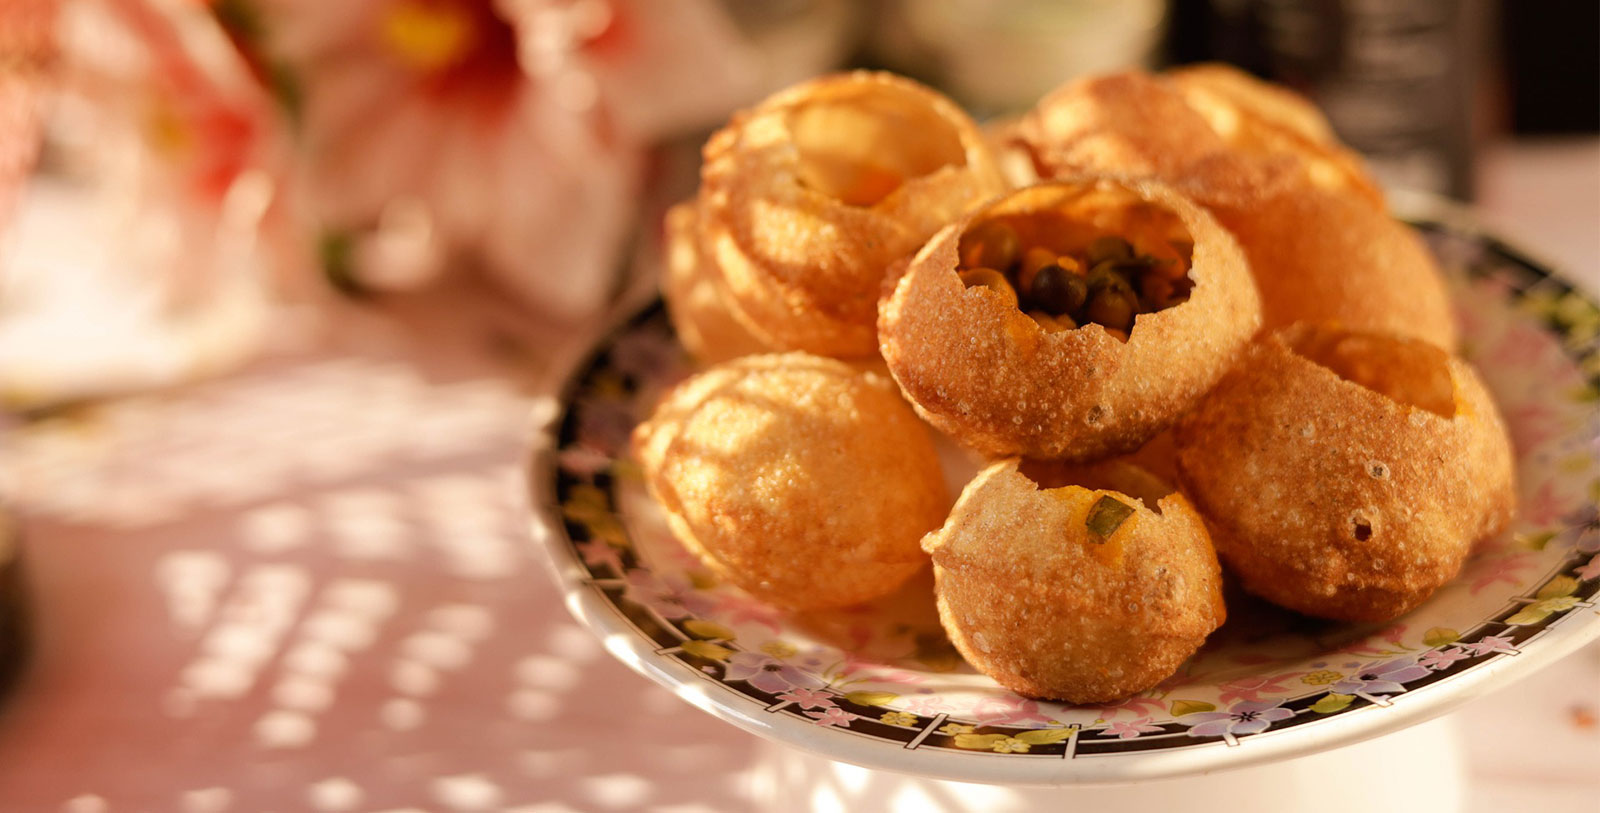 Taste some pani puri when out exploring the surrounding countryside.